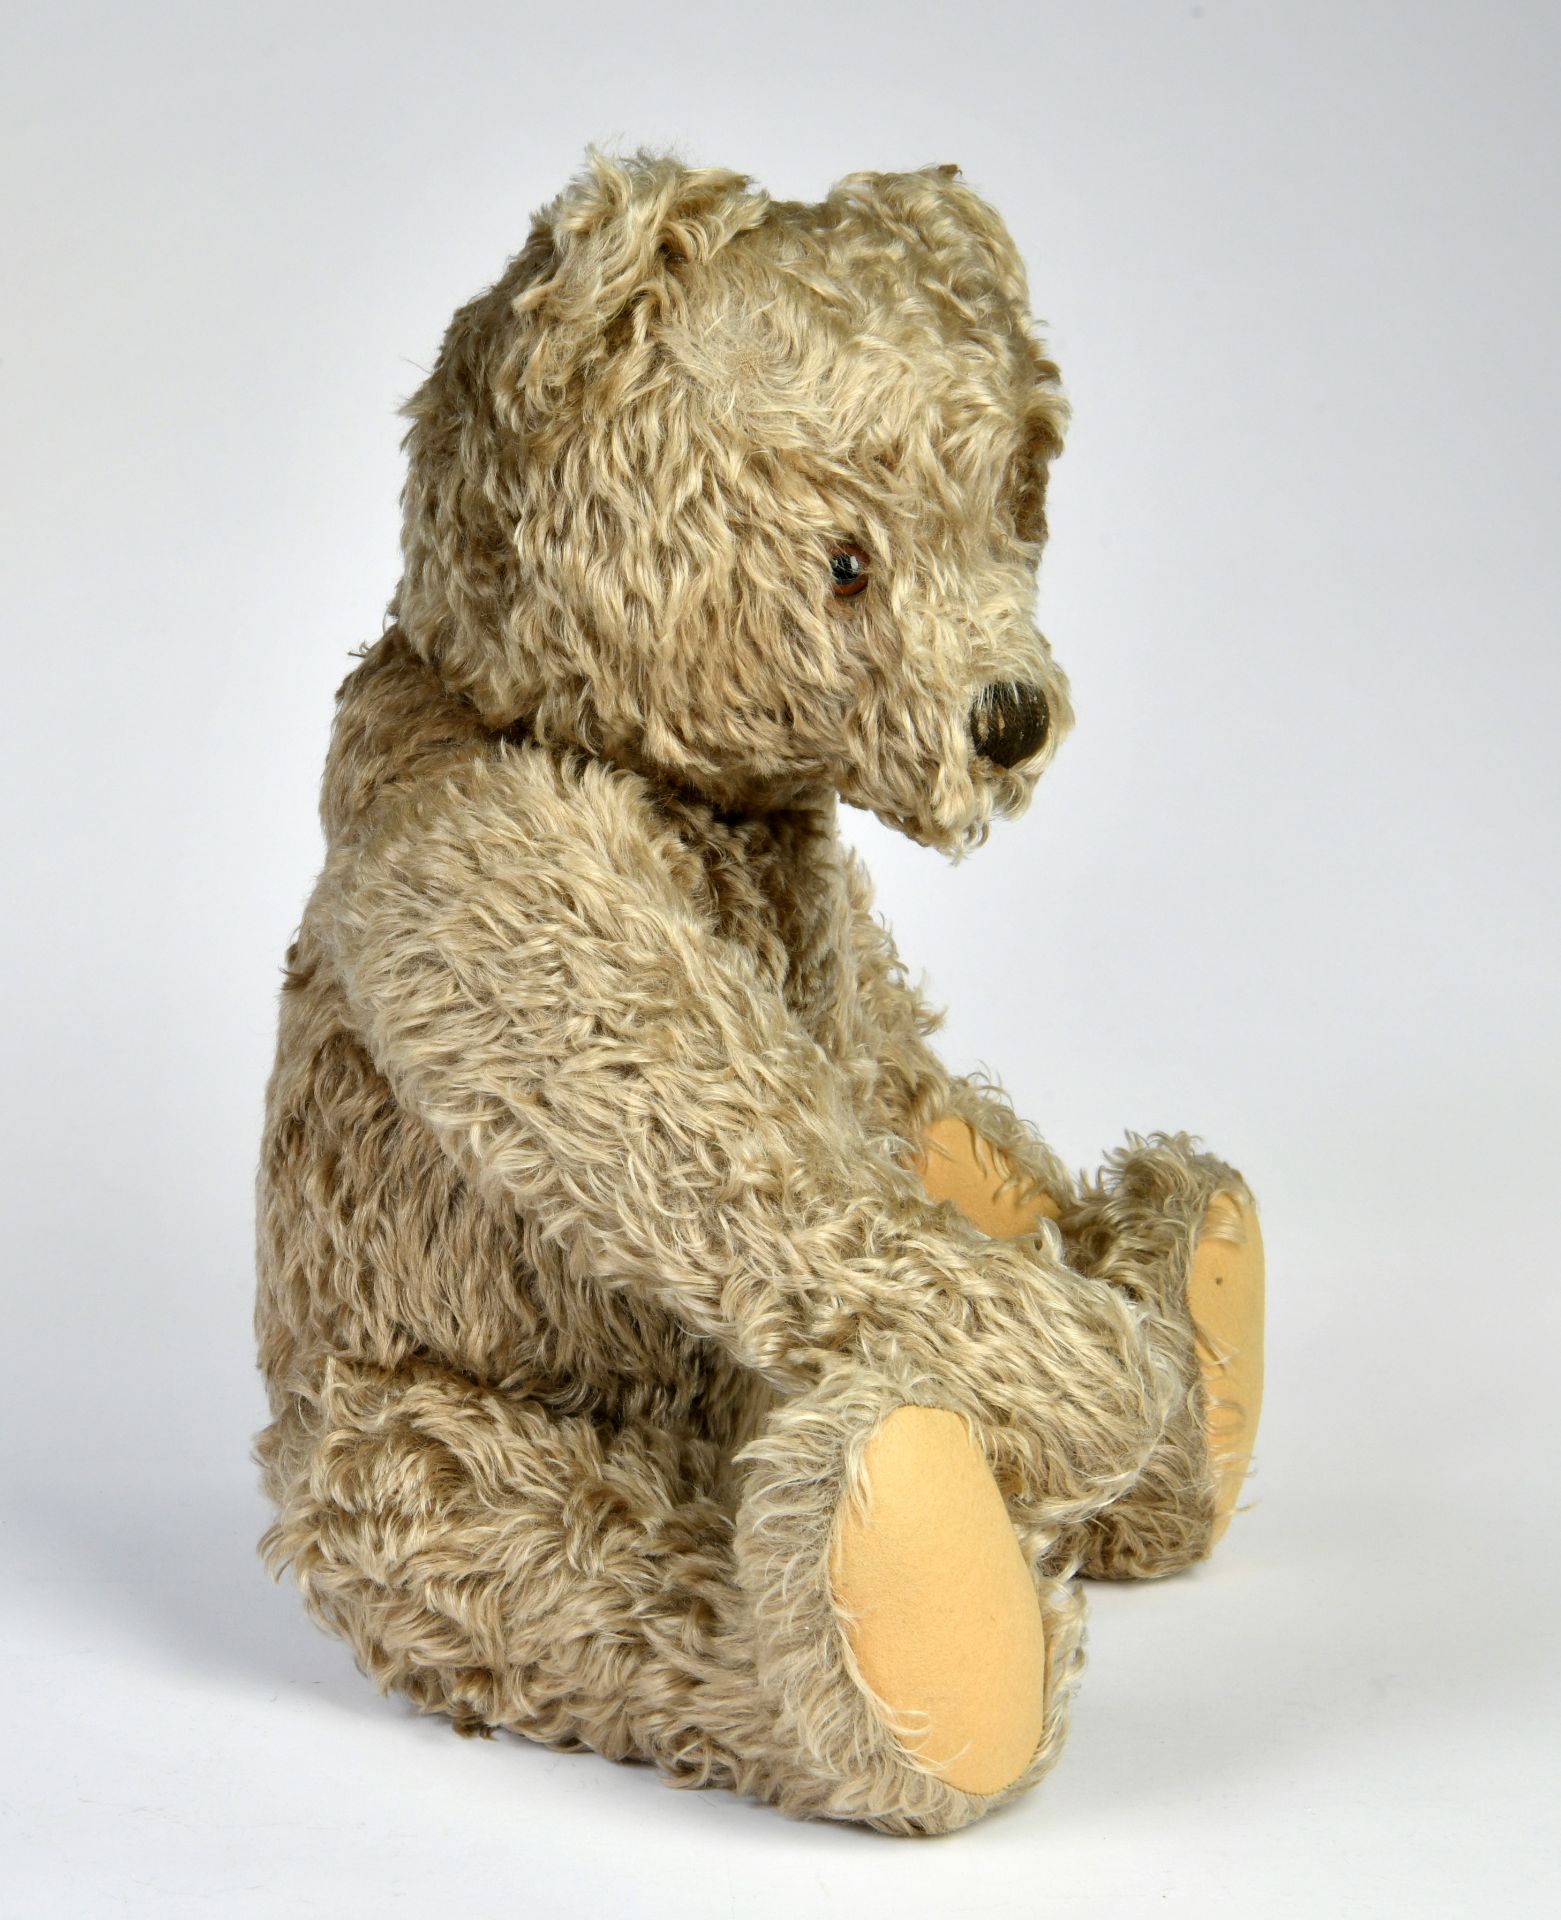 Steiff, bear, 60cm, 1950s/1960s, with buttom, brown, very good condition - Image 2 of 2